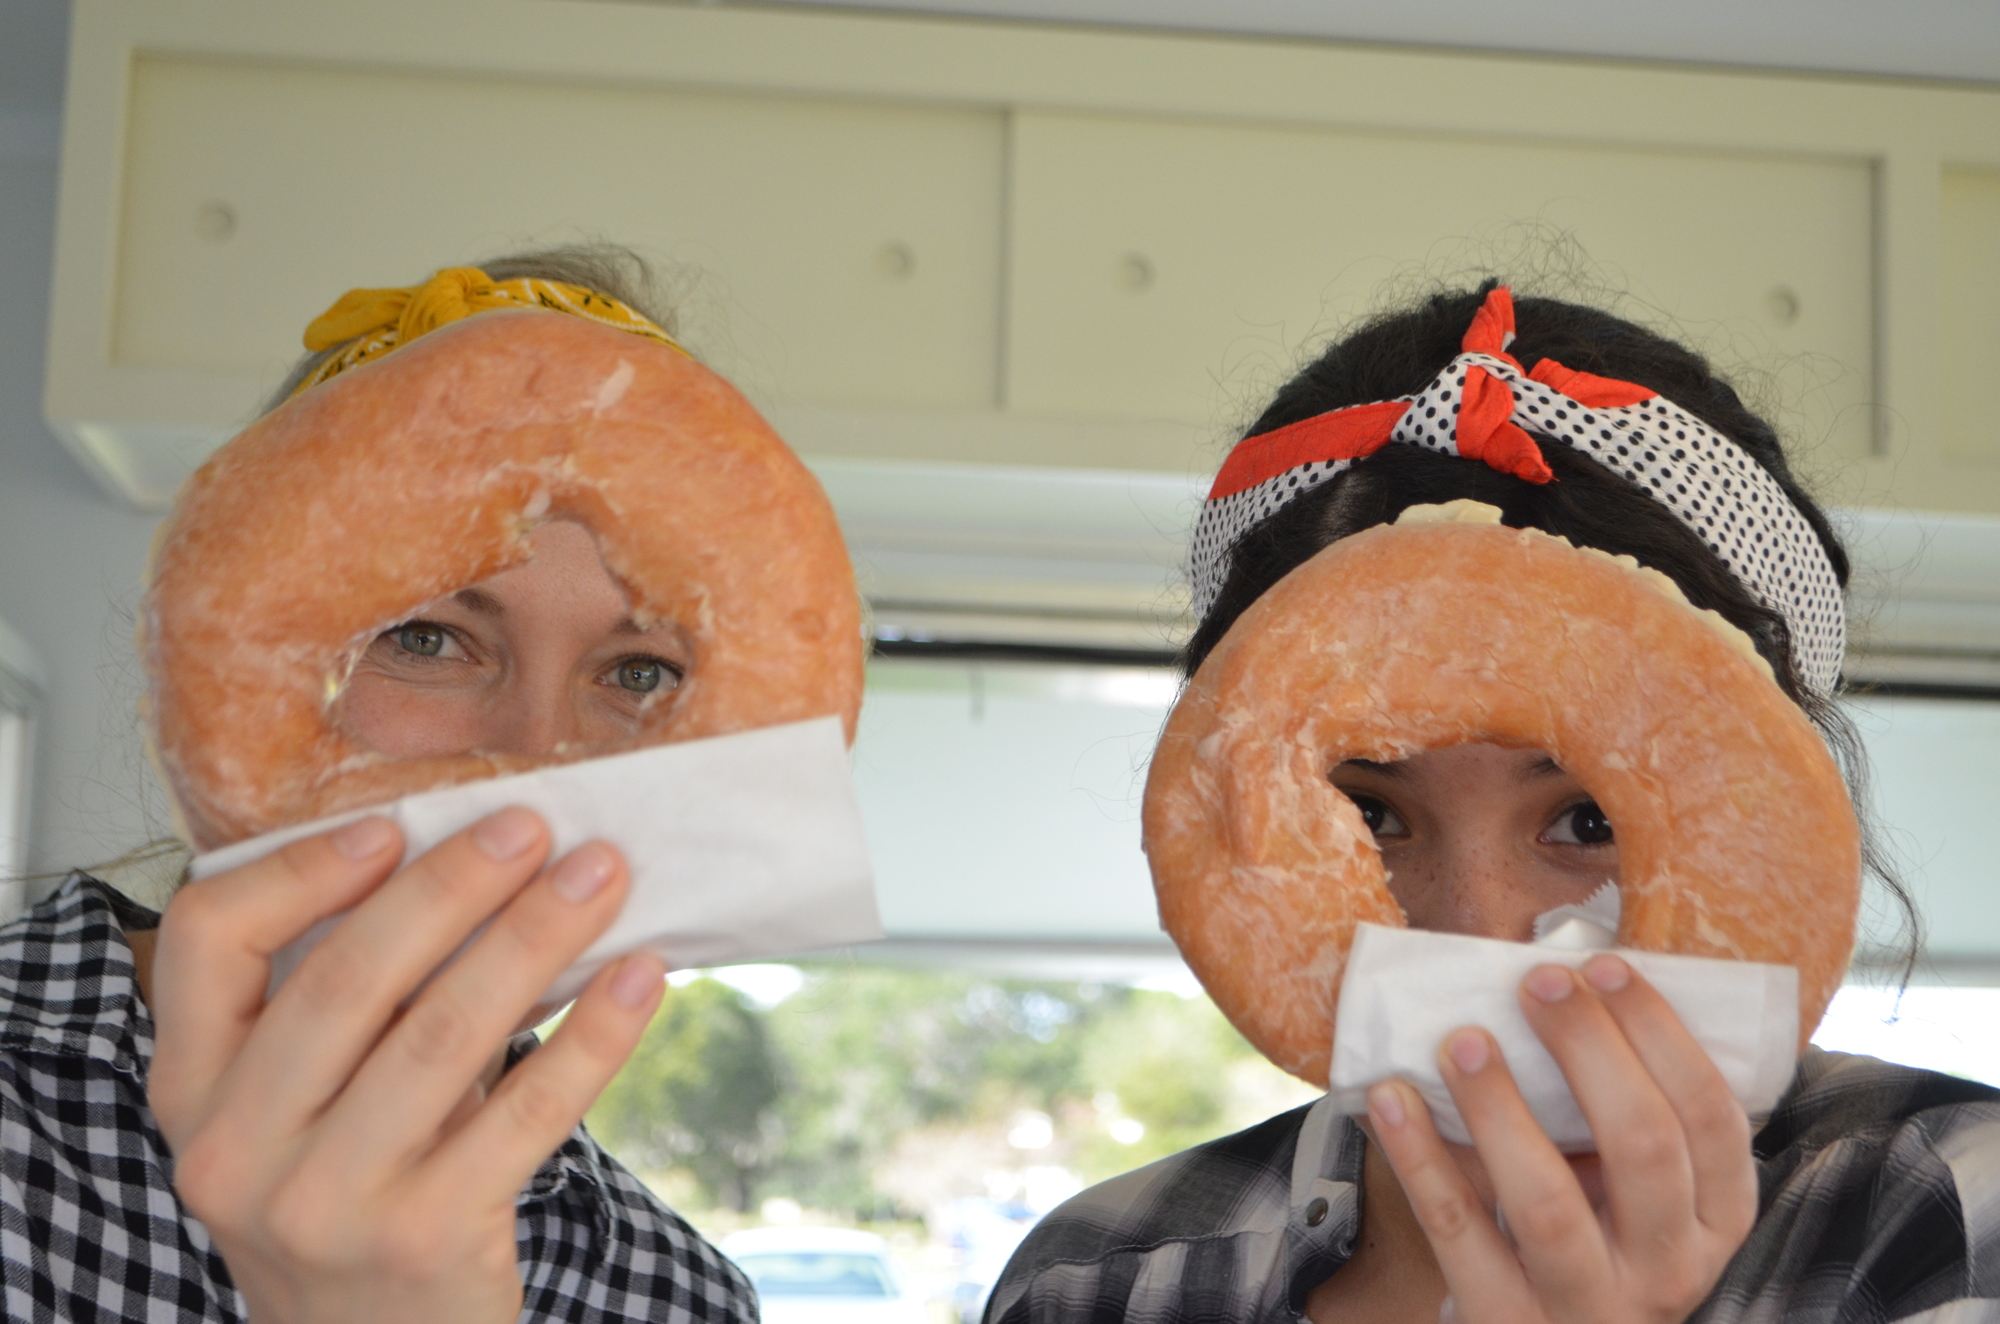 Sadie and Roselyn Peachey delight in delivering their donuts to the foodies of Sarasota.